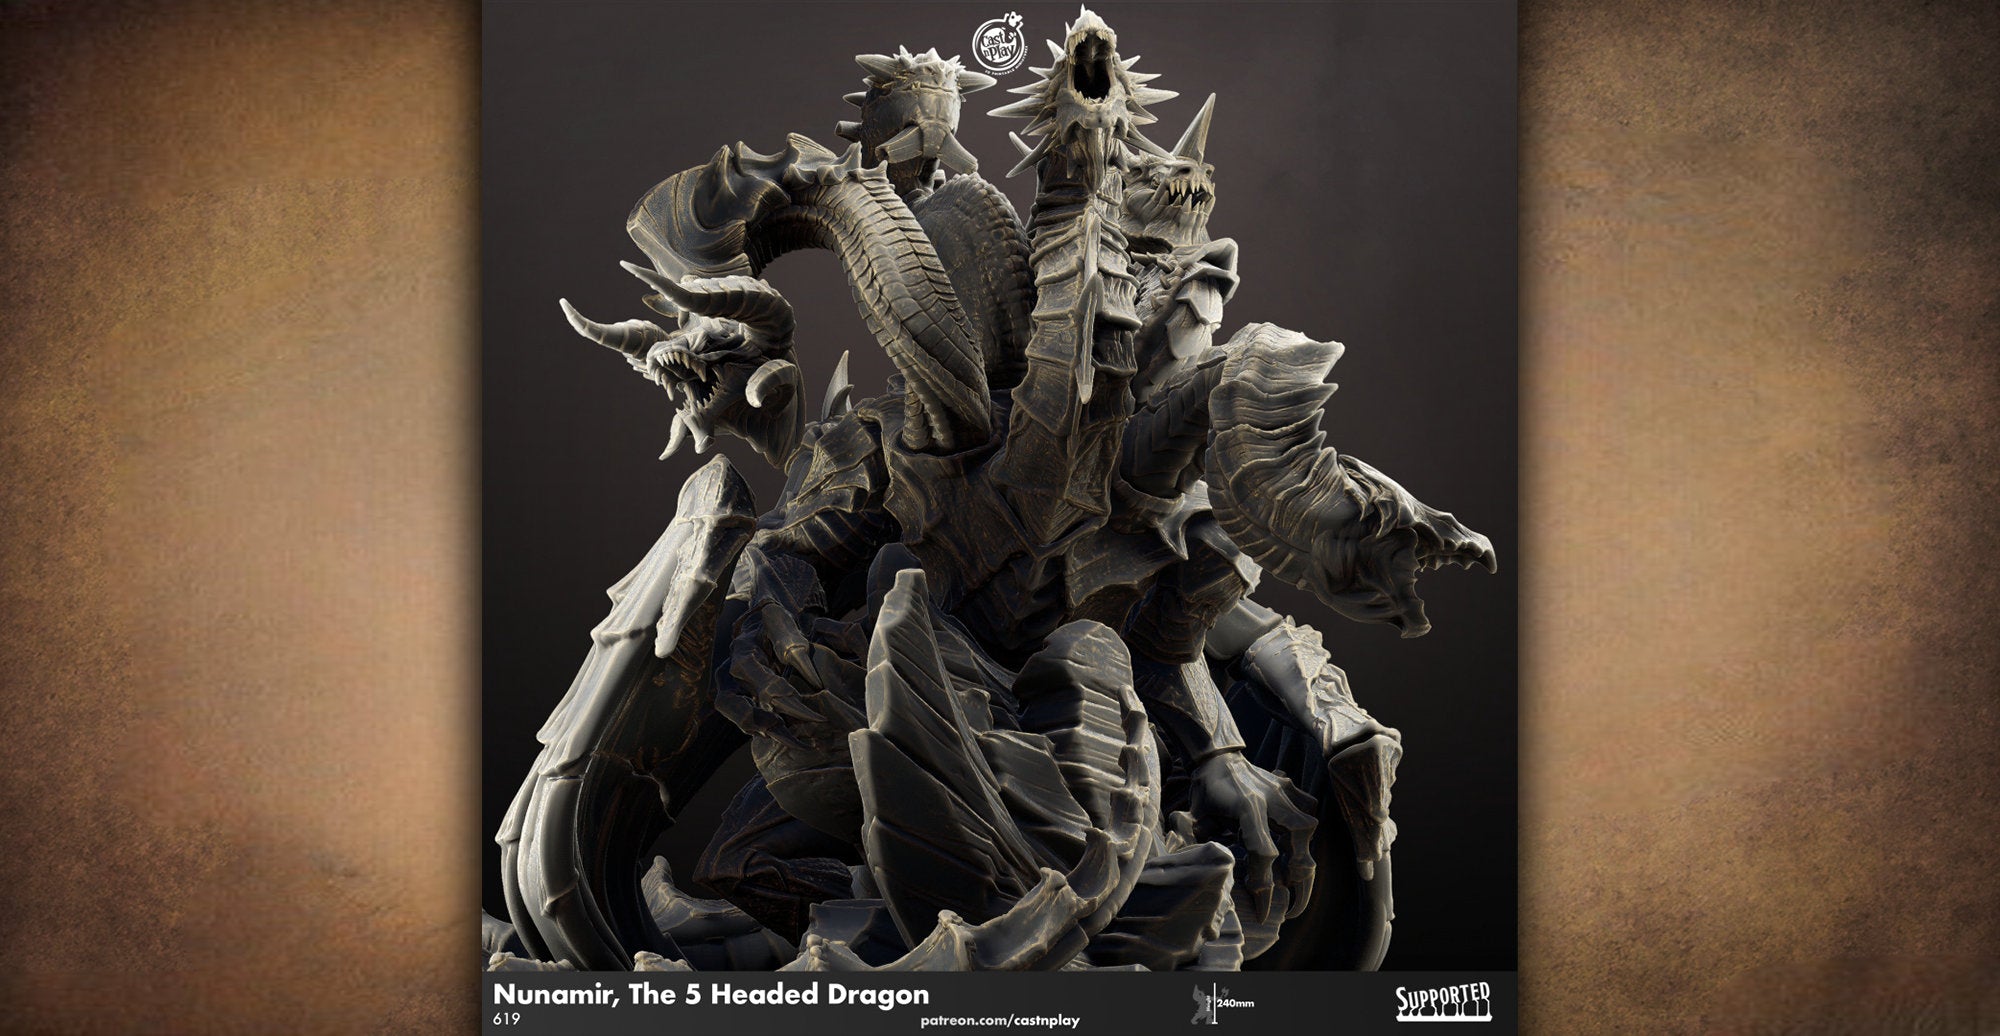 5-Headed-DRAGON "Nunamir (Tiamat)" | 12K 3D Print | Dungeons and Dragons | DnD | Pathfinder | Tabletop | Hero Size | 28-32 mm-Role Playing Miniatures